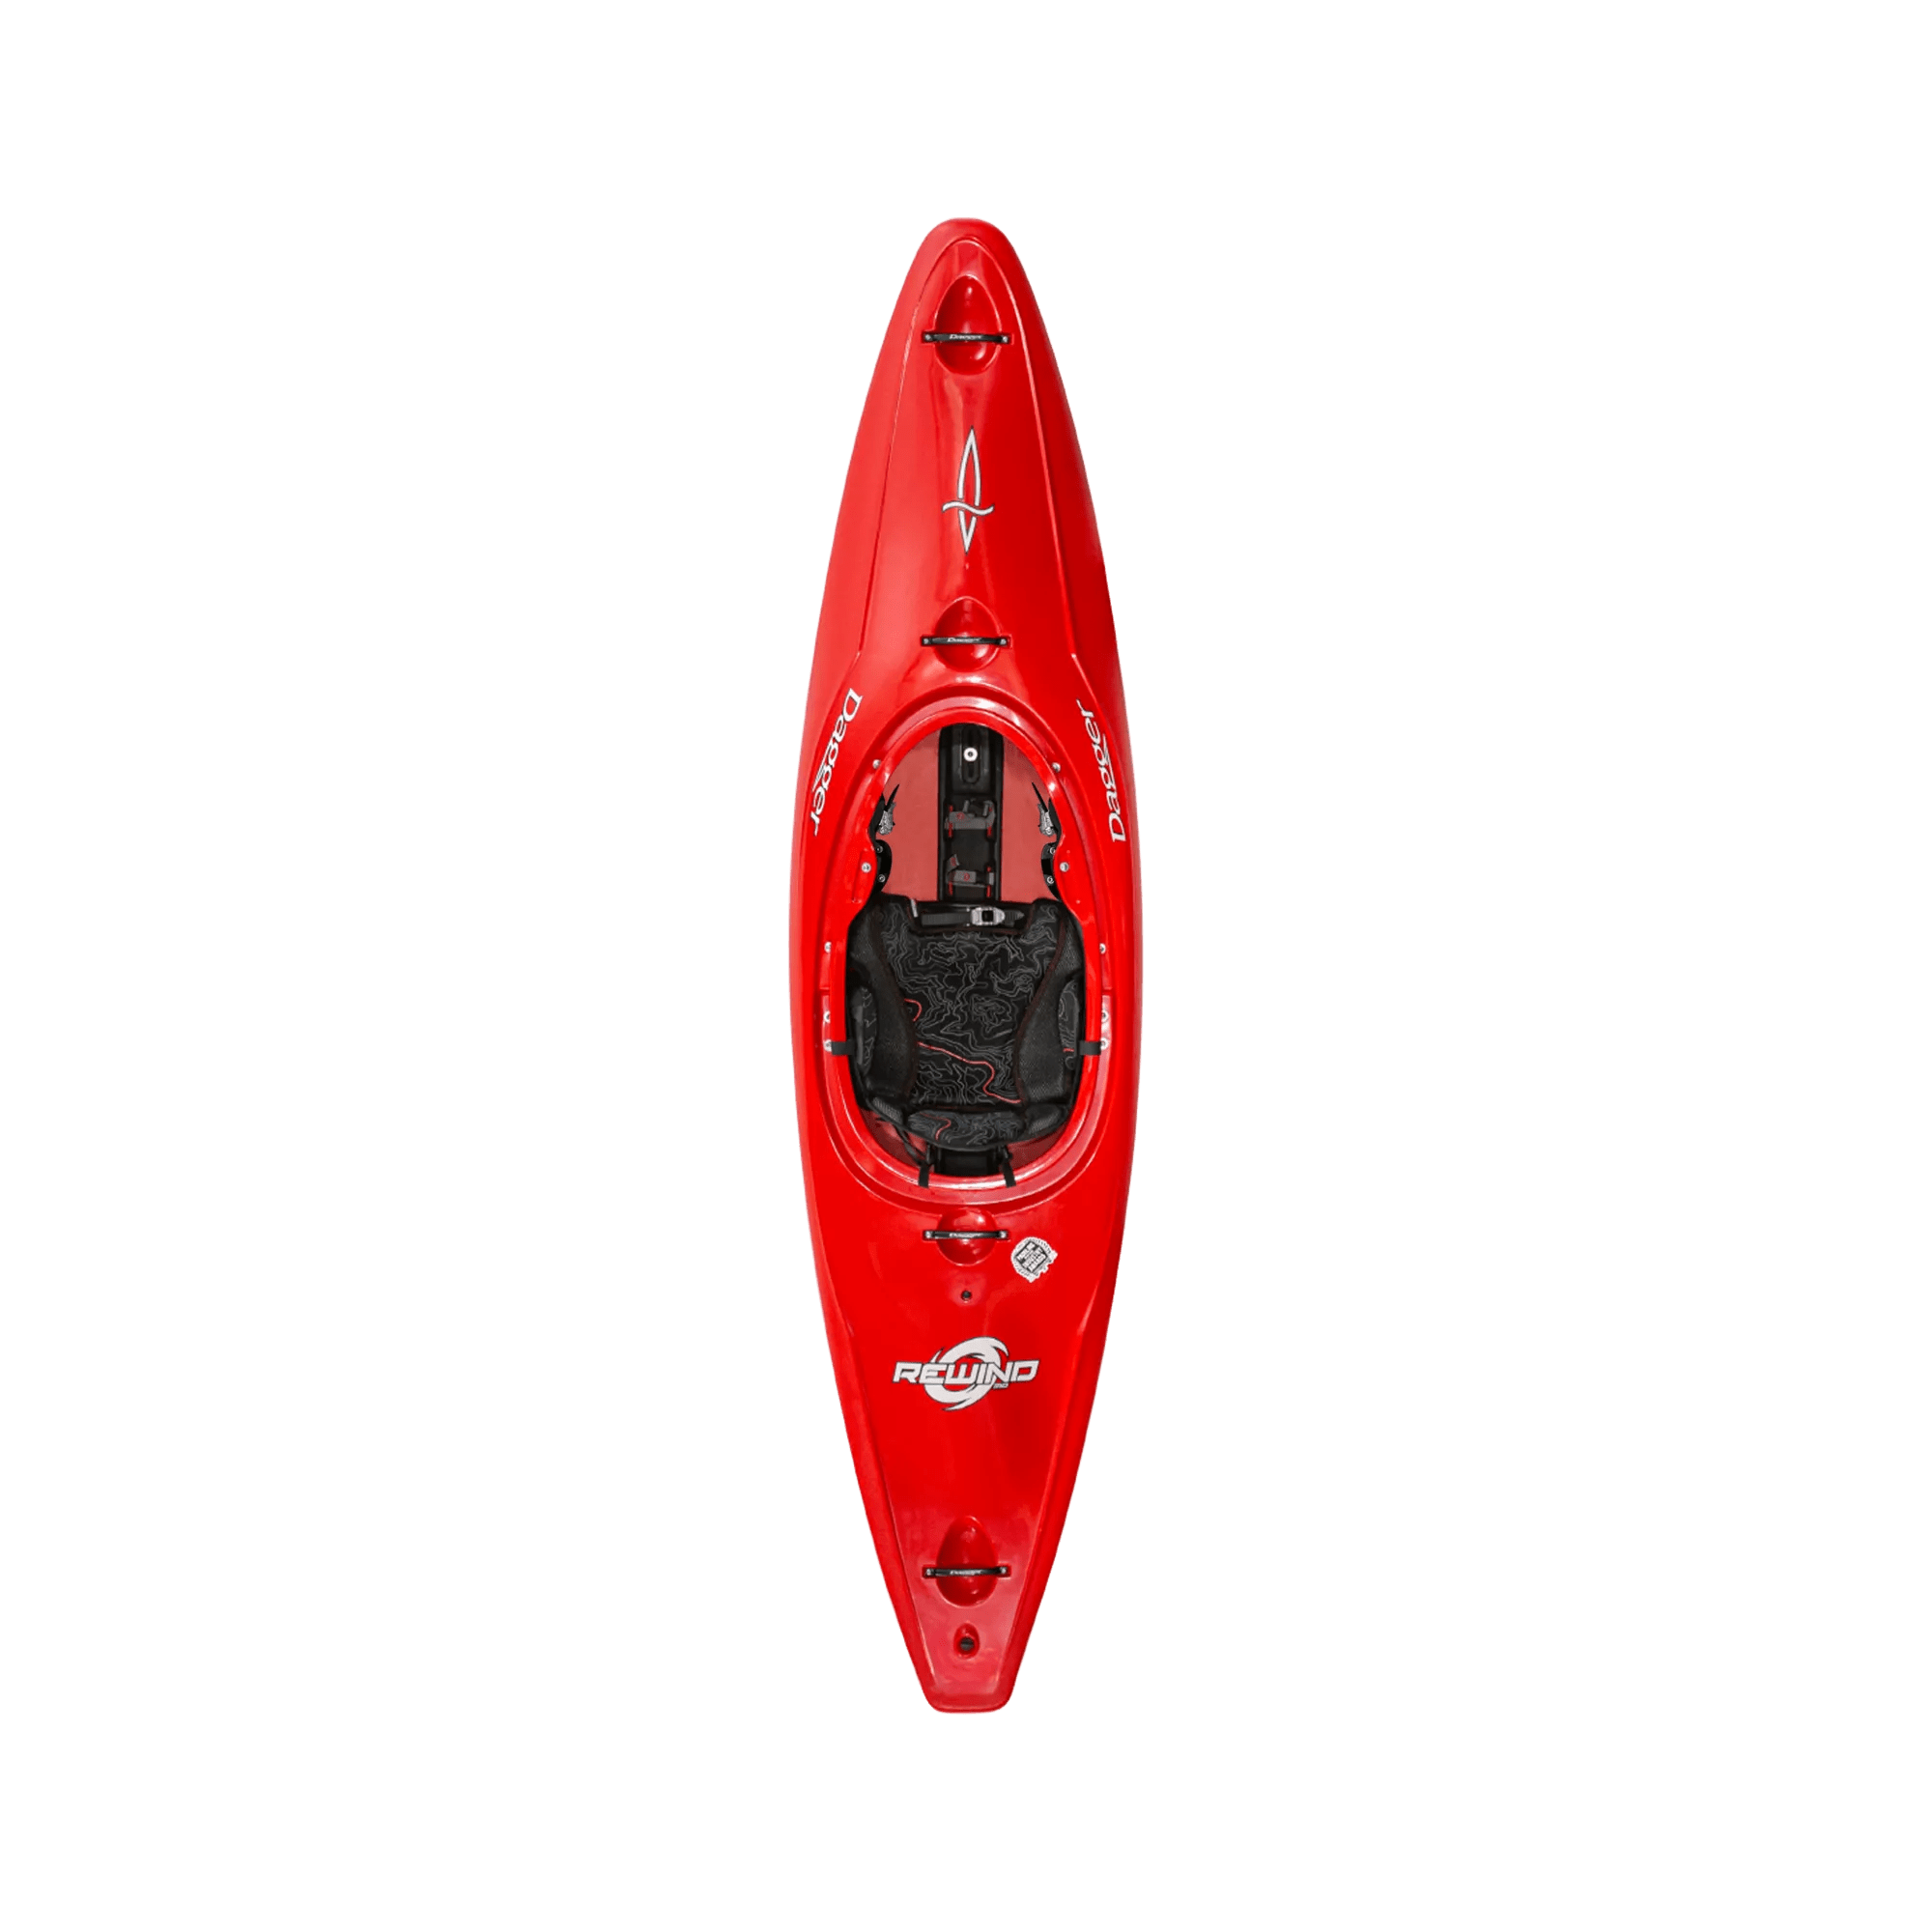 DAGGER - Rewind SM River Play Whitewater Kayak - Red - 9010470057 - TOP 